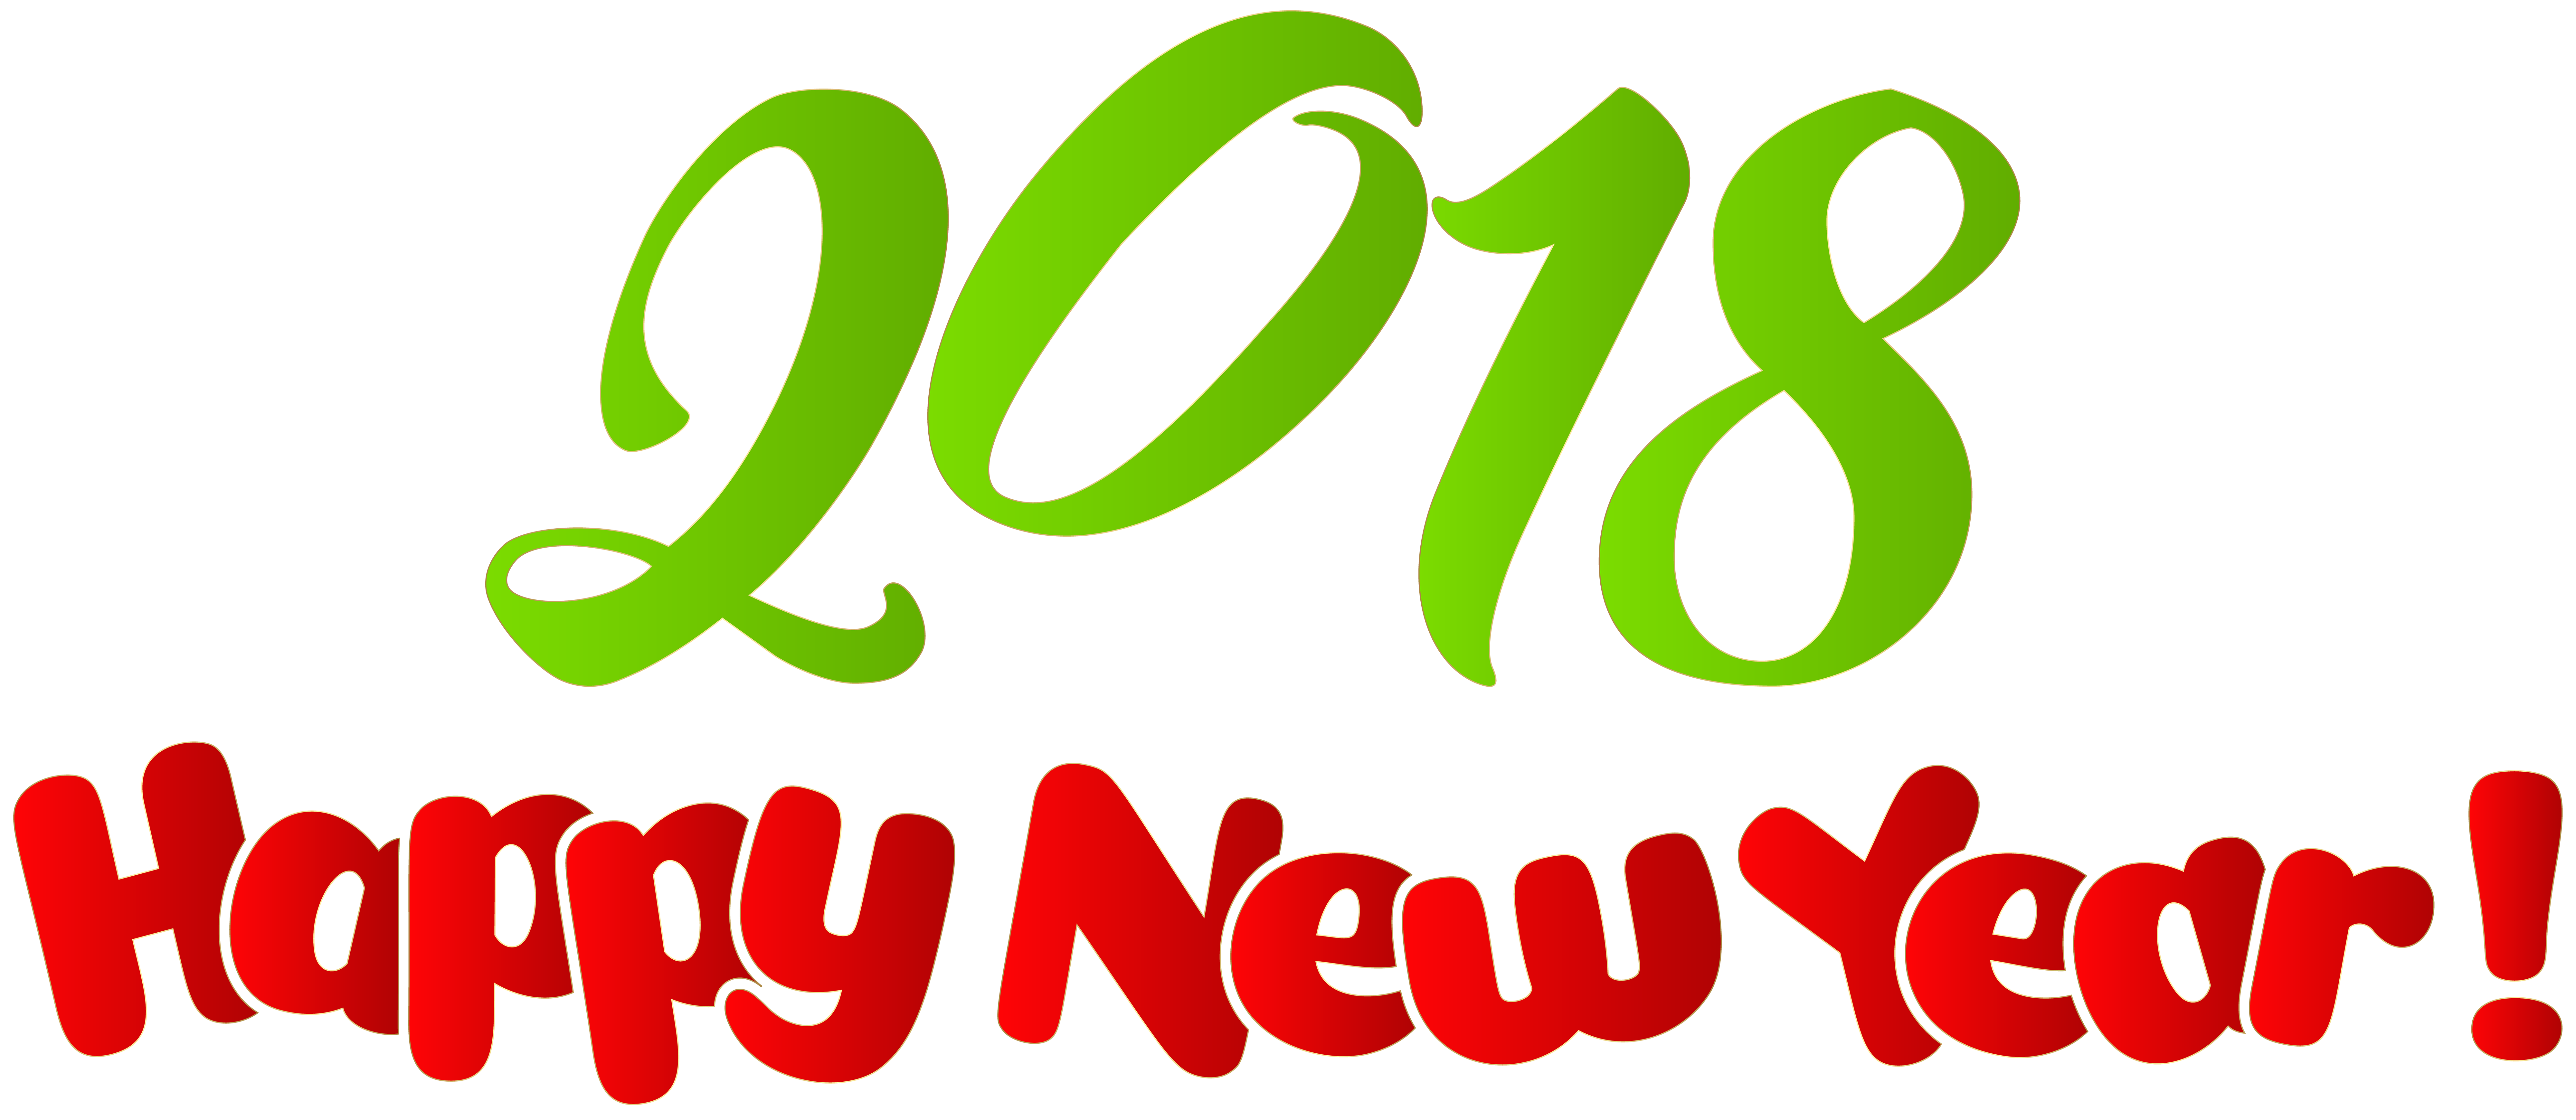 New Year Wish Clip Art 2018 Happy New Year Png Clip Art Image Png